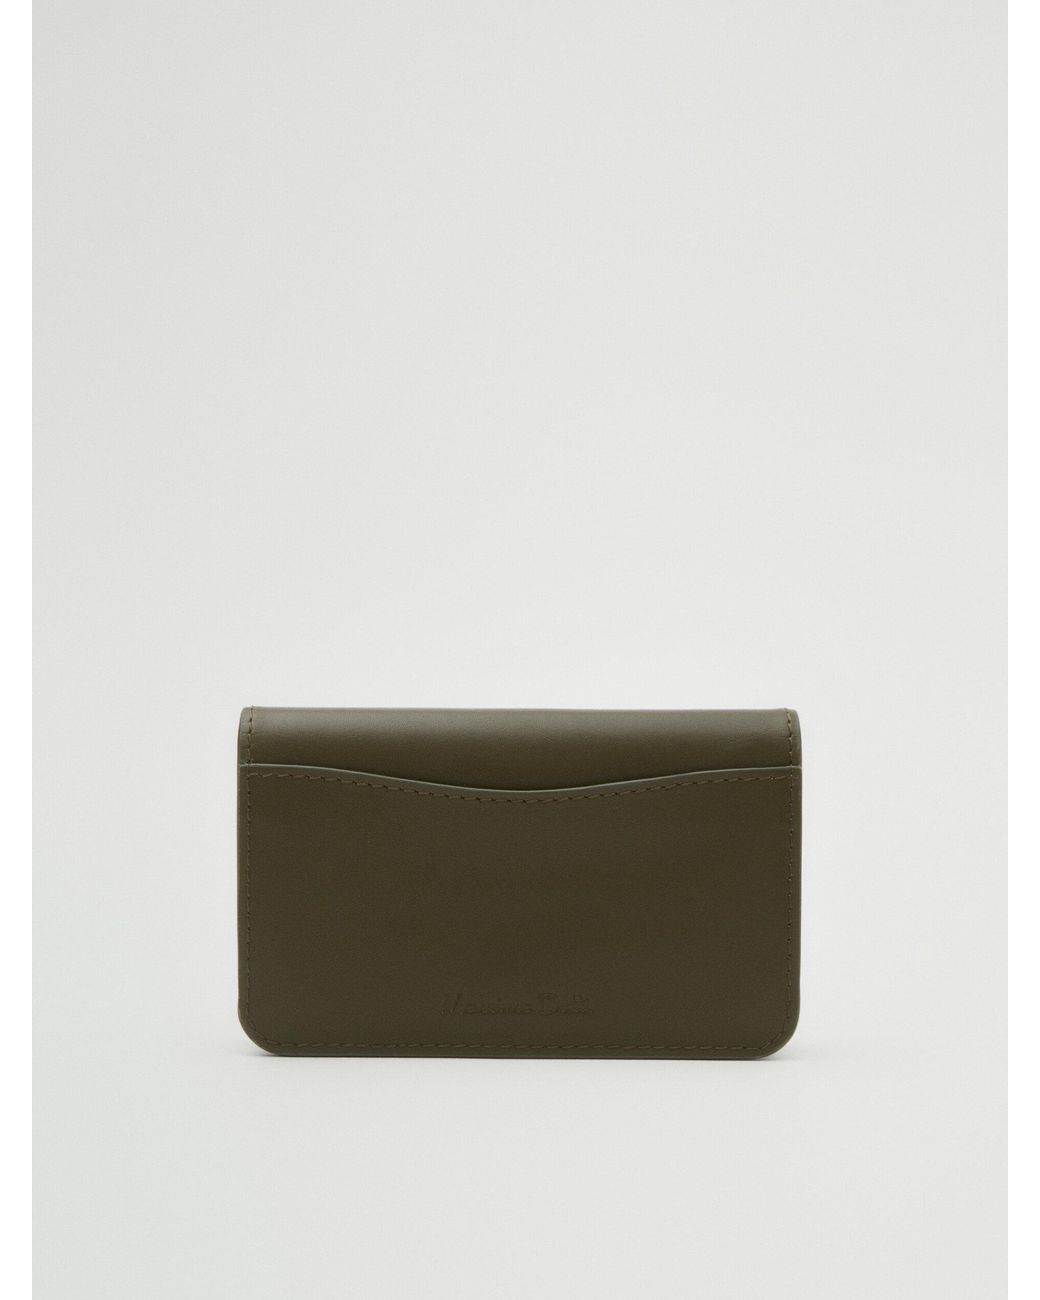 MASSIMO DUTTI Leather Wallet in Green | Lyst